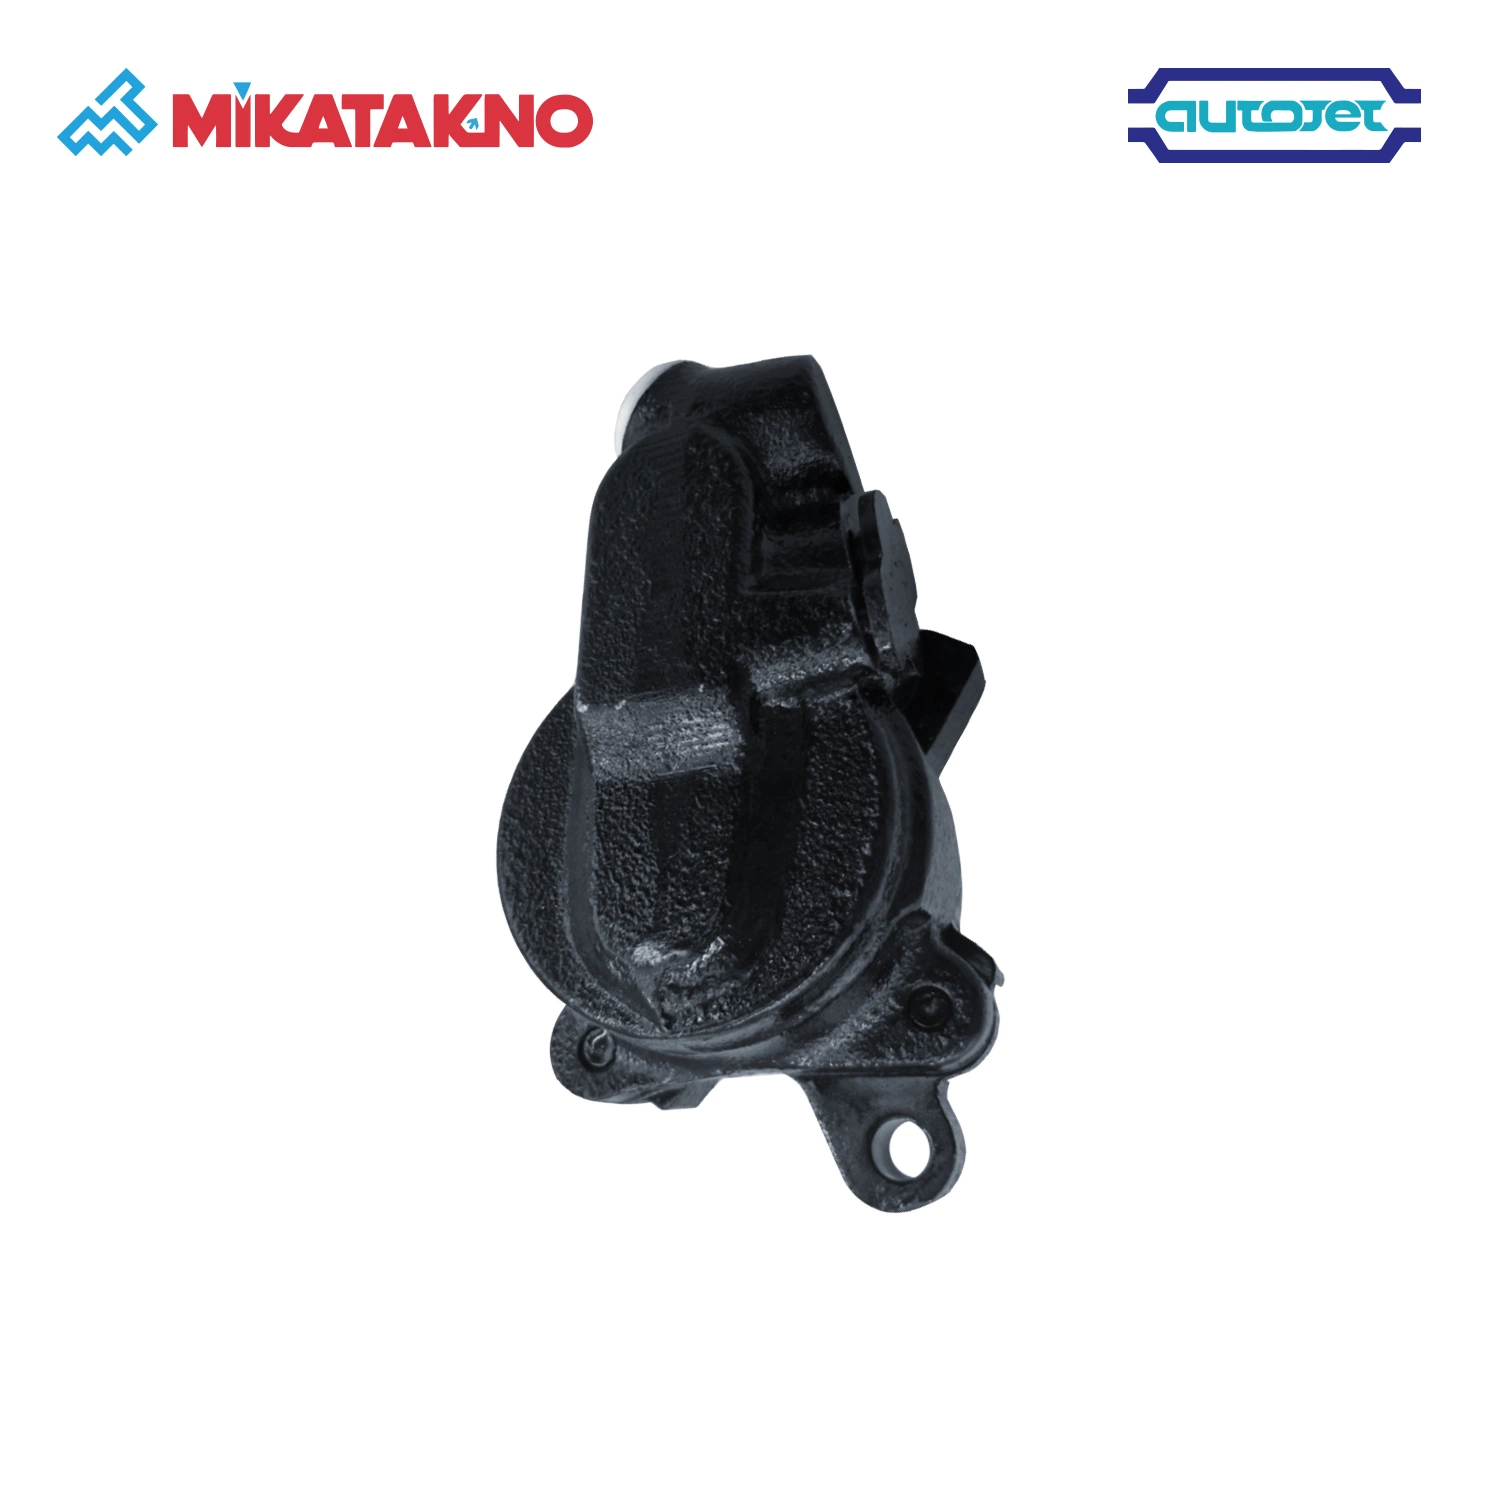 Power Steering Pump for Toyota Dyna Bu91 Auto Steering System -Auto Parts - 44320-87304 Best Price